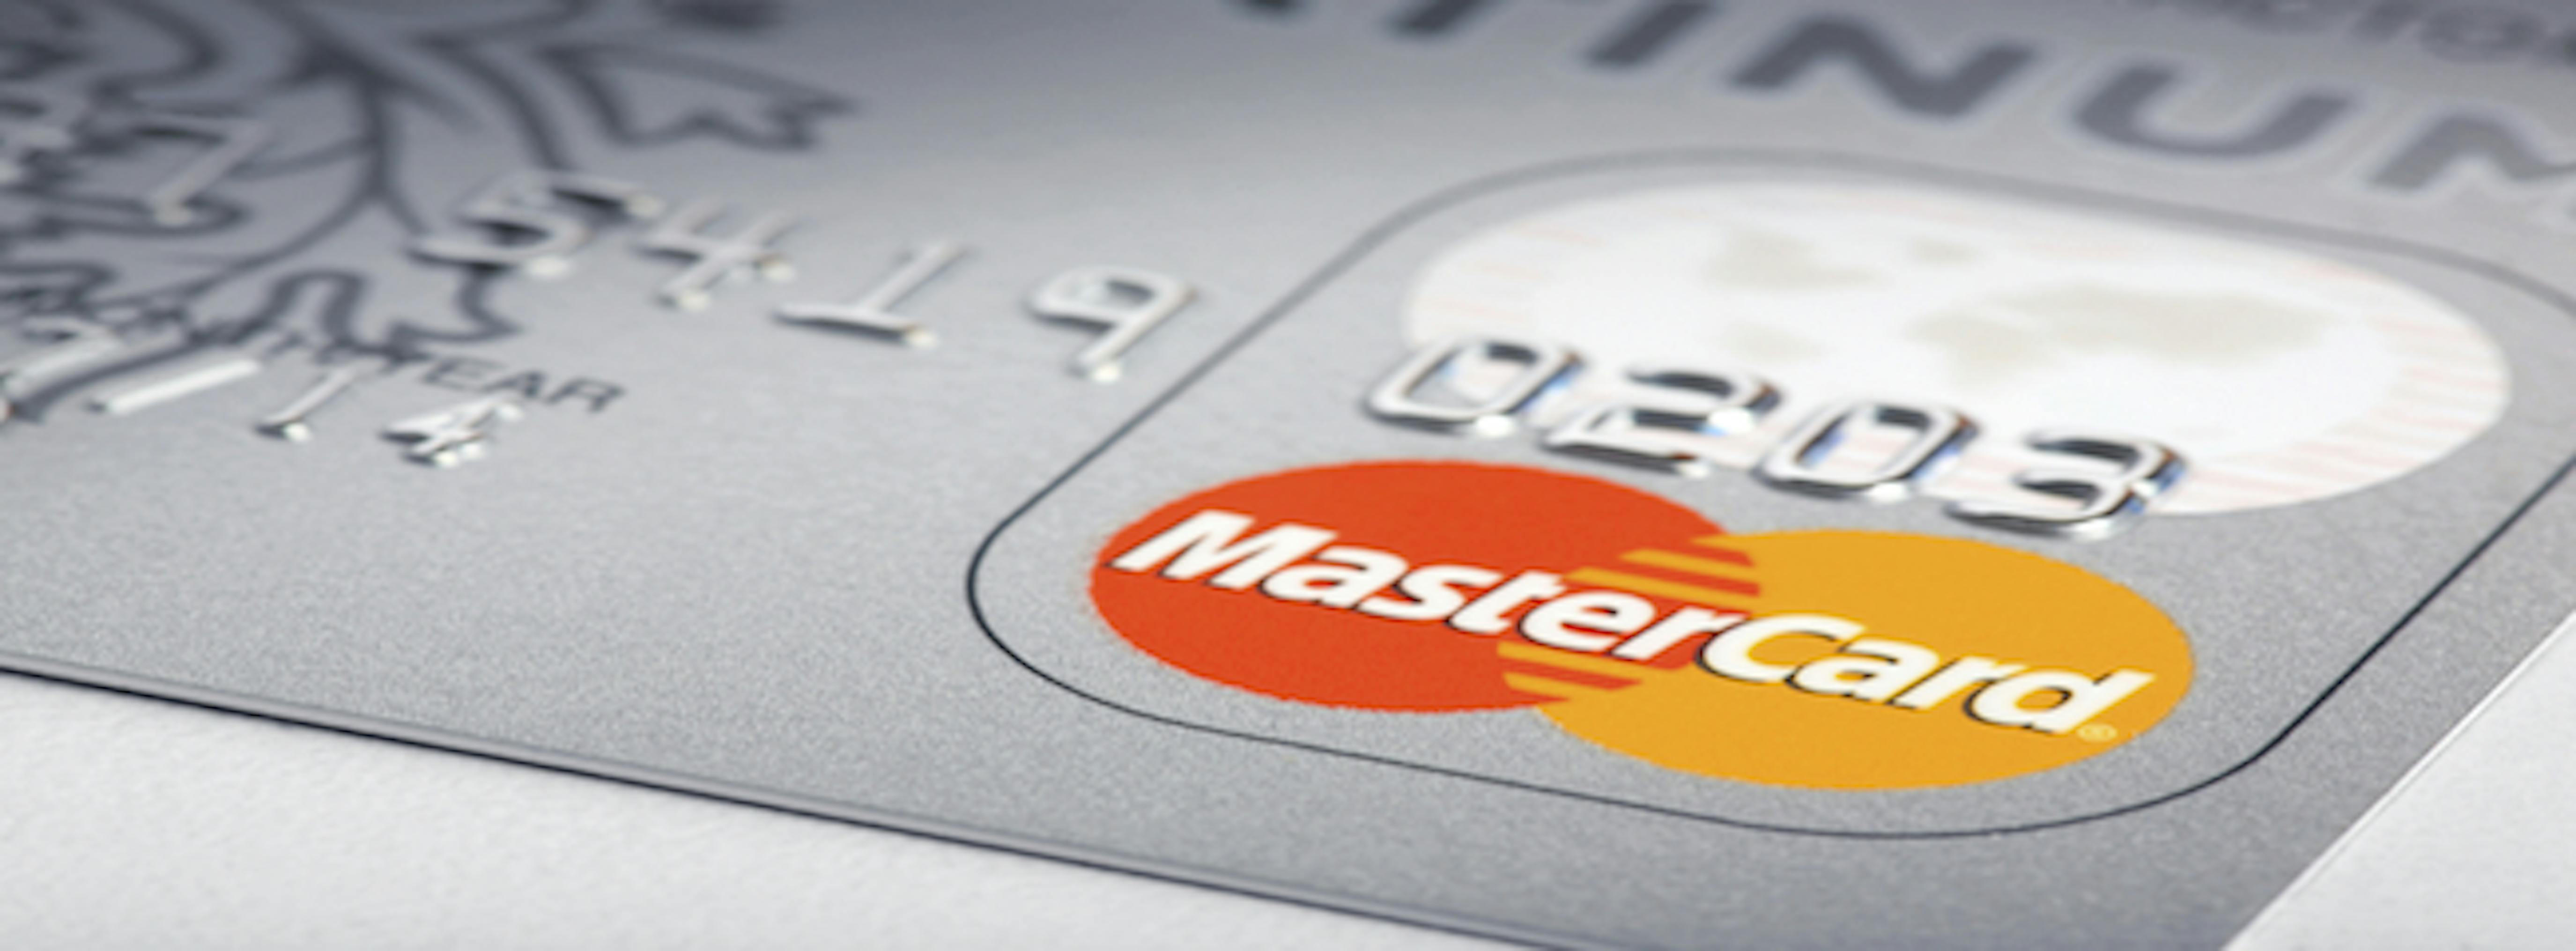 find-the-best-mastercard-credit-cards-uswitch